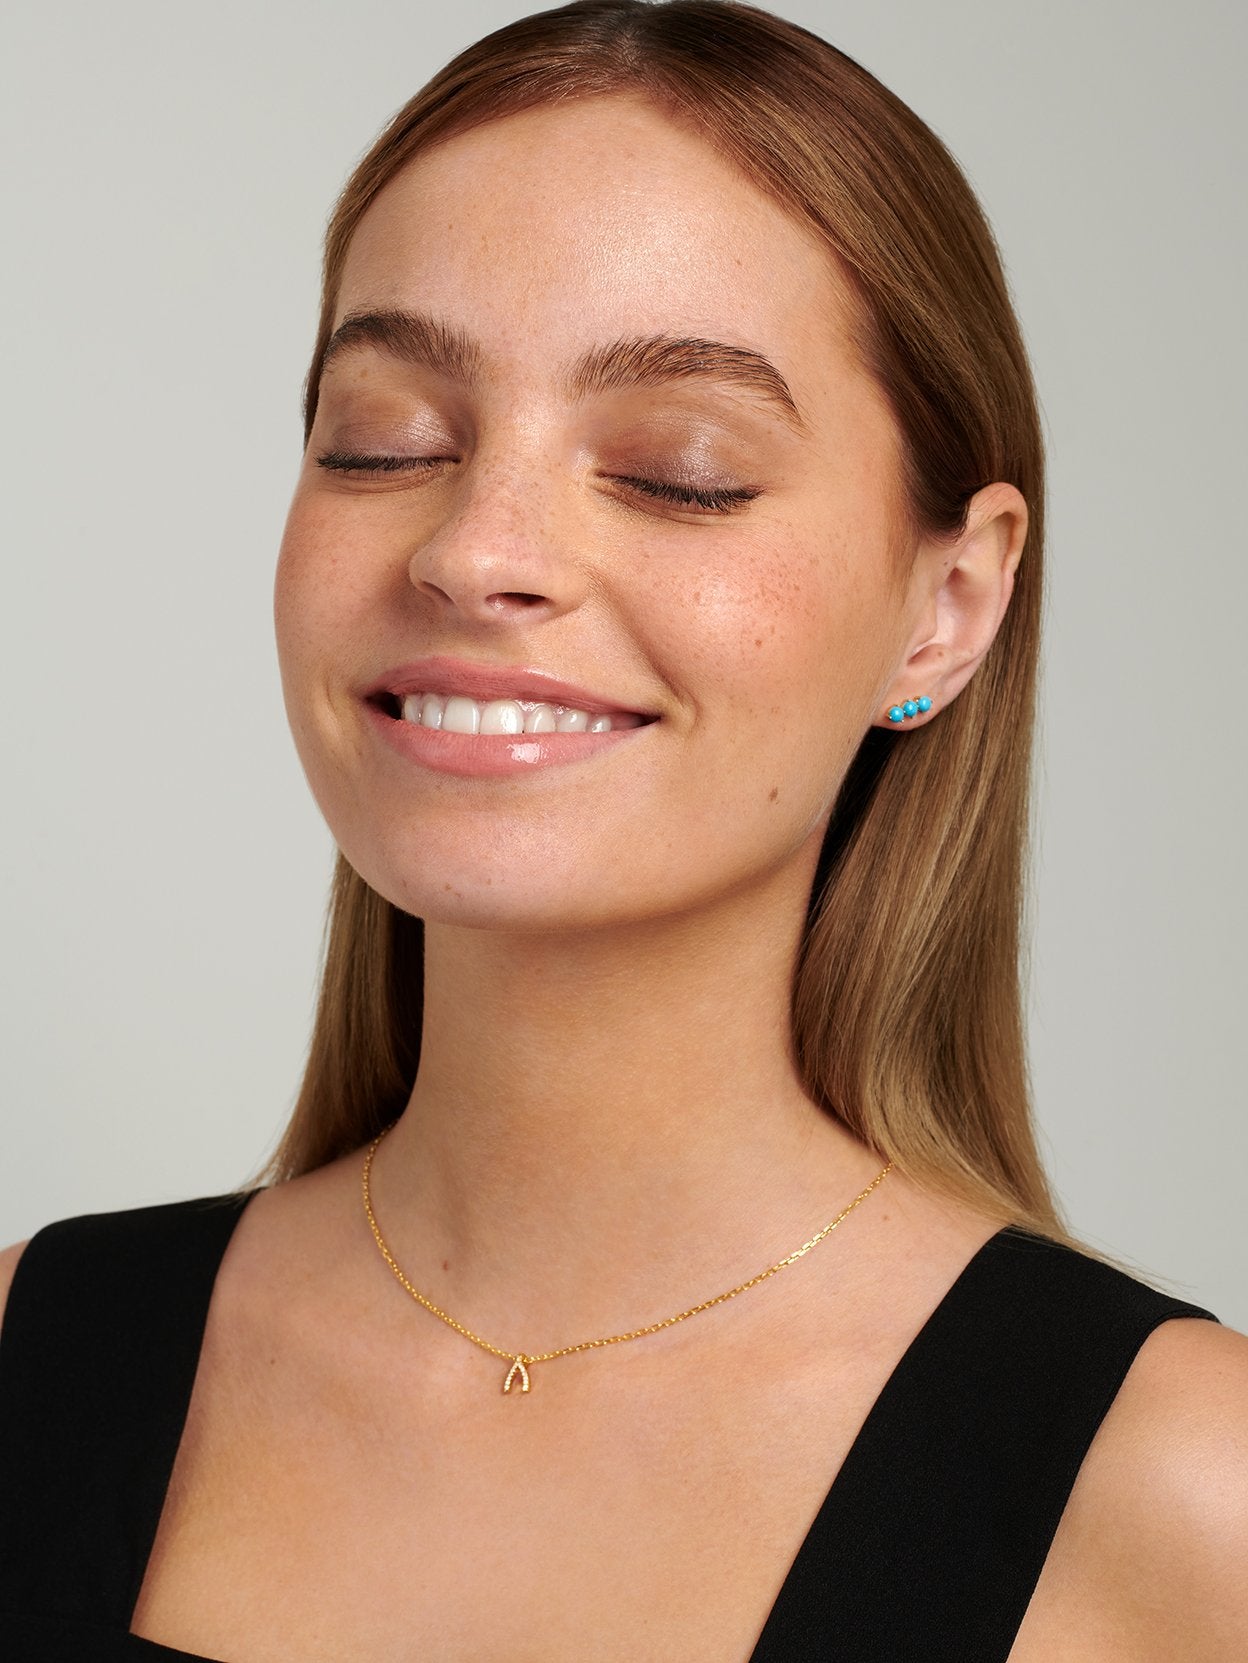 Teenage model wearing a gold necklace with a small wishbone pendant.